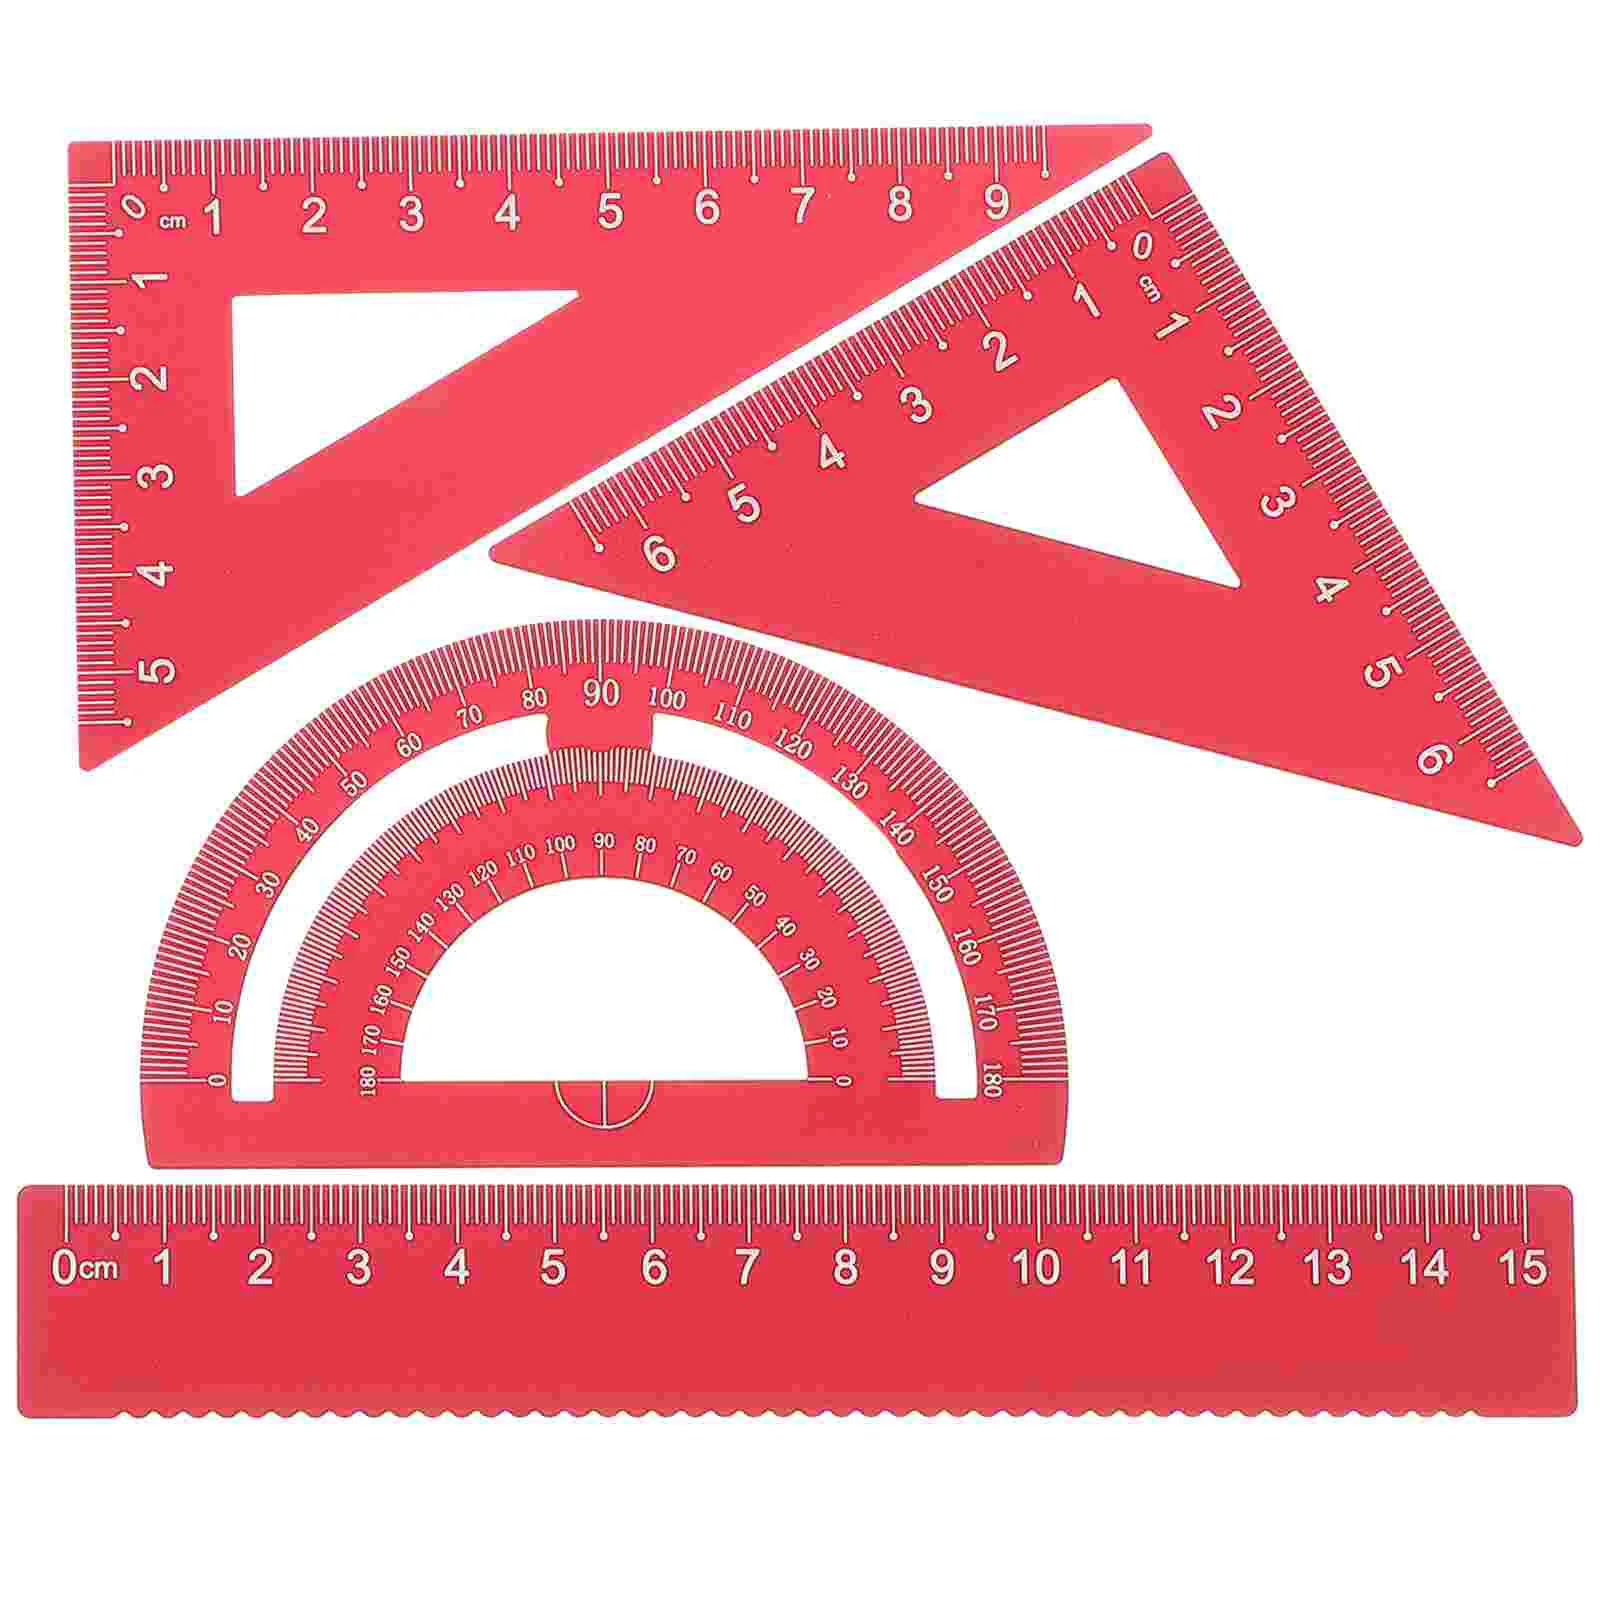 4pc set ruler aluminum protractor students math metal triangle ruler set office cute school supplies percision measuring tools 4 Pack Geometry Set Metal Triangle Ruler Protractor Straight Ruler Tool Set Math Protractor School and Office Supplies for Kids